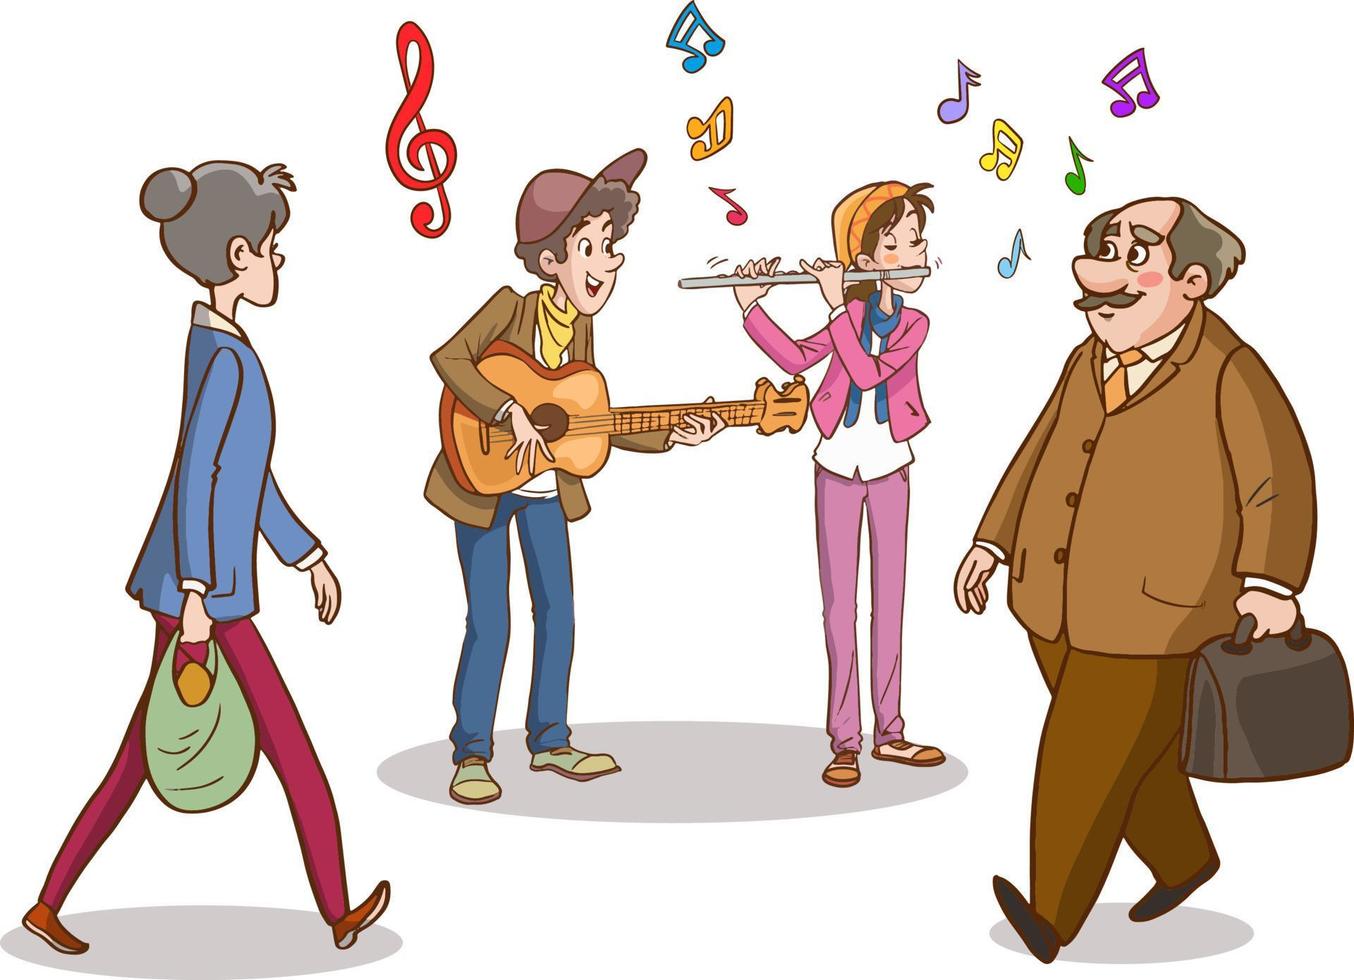 Group of street musicians, cartoon characters playing music, flat vector illustration isolated on white background. City streets performance or show, modern urban lifestyle scene.